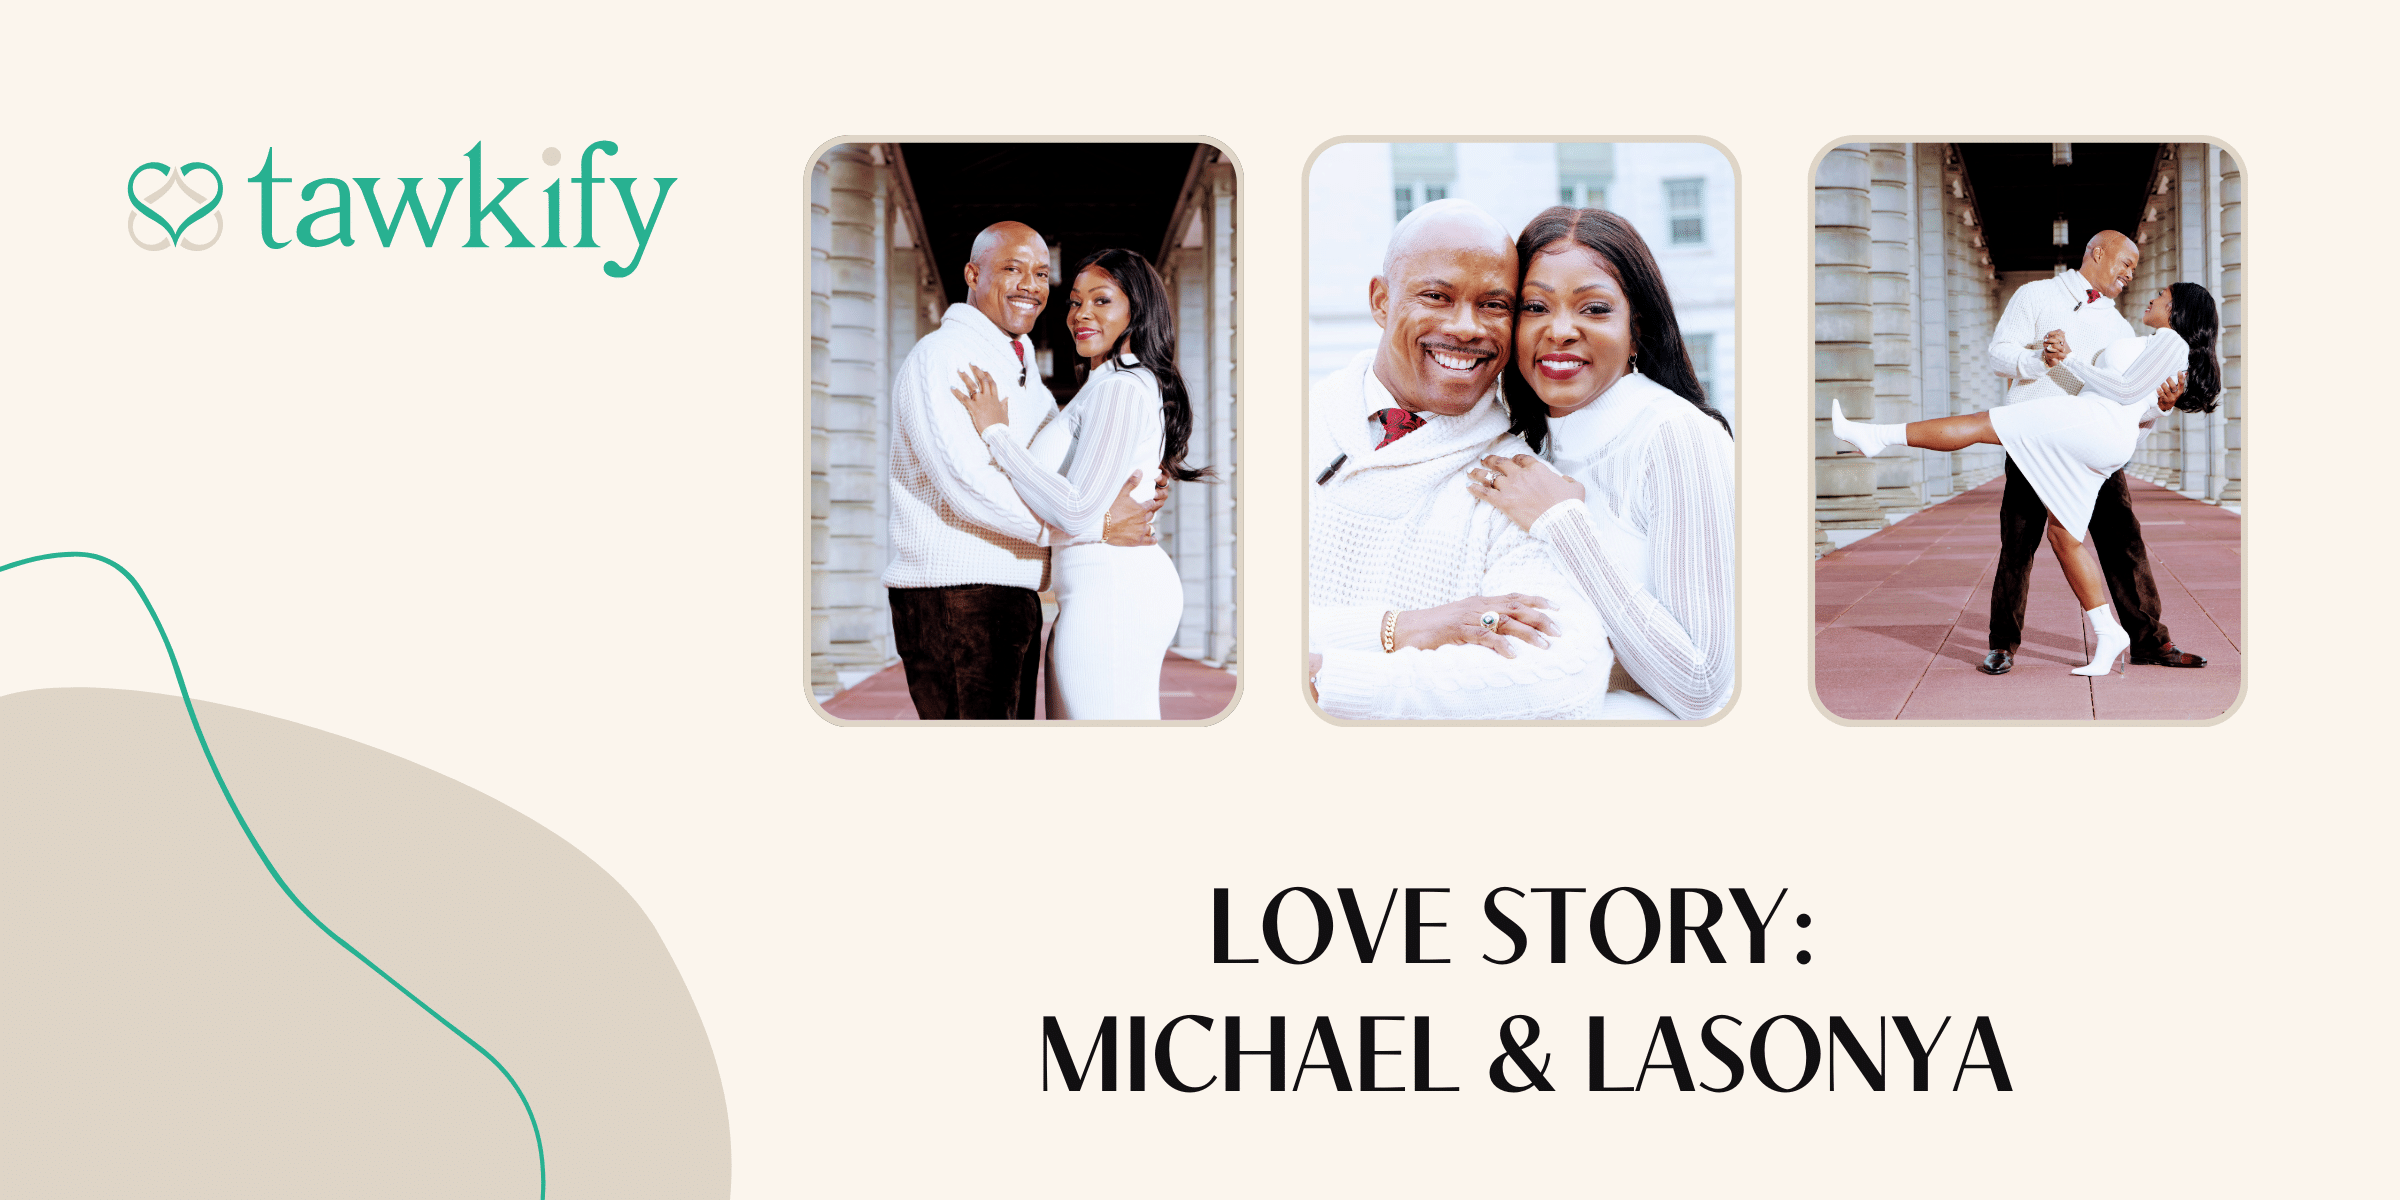 Real Tawkify couples, Michael & LaSonya, discuss how their matchmaking experience helped them find love, in this Tawkify Testimonial.